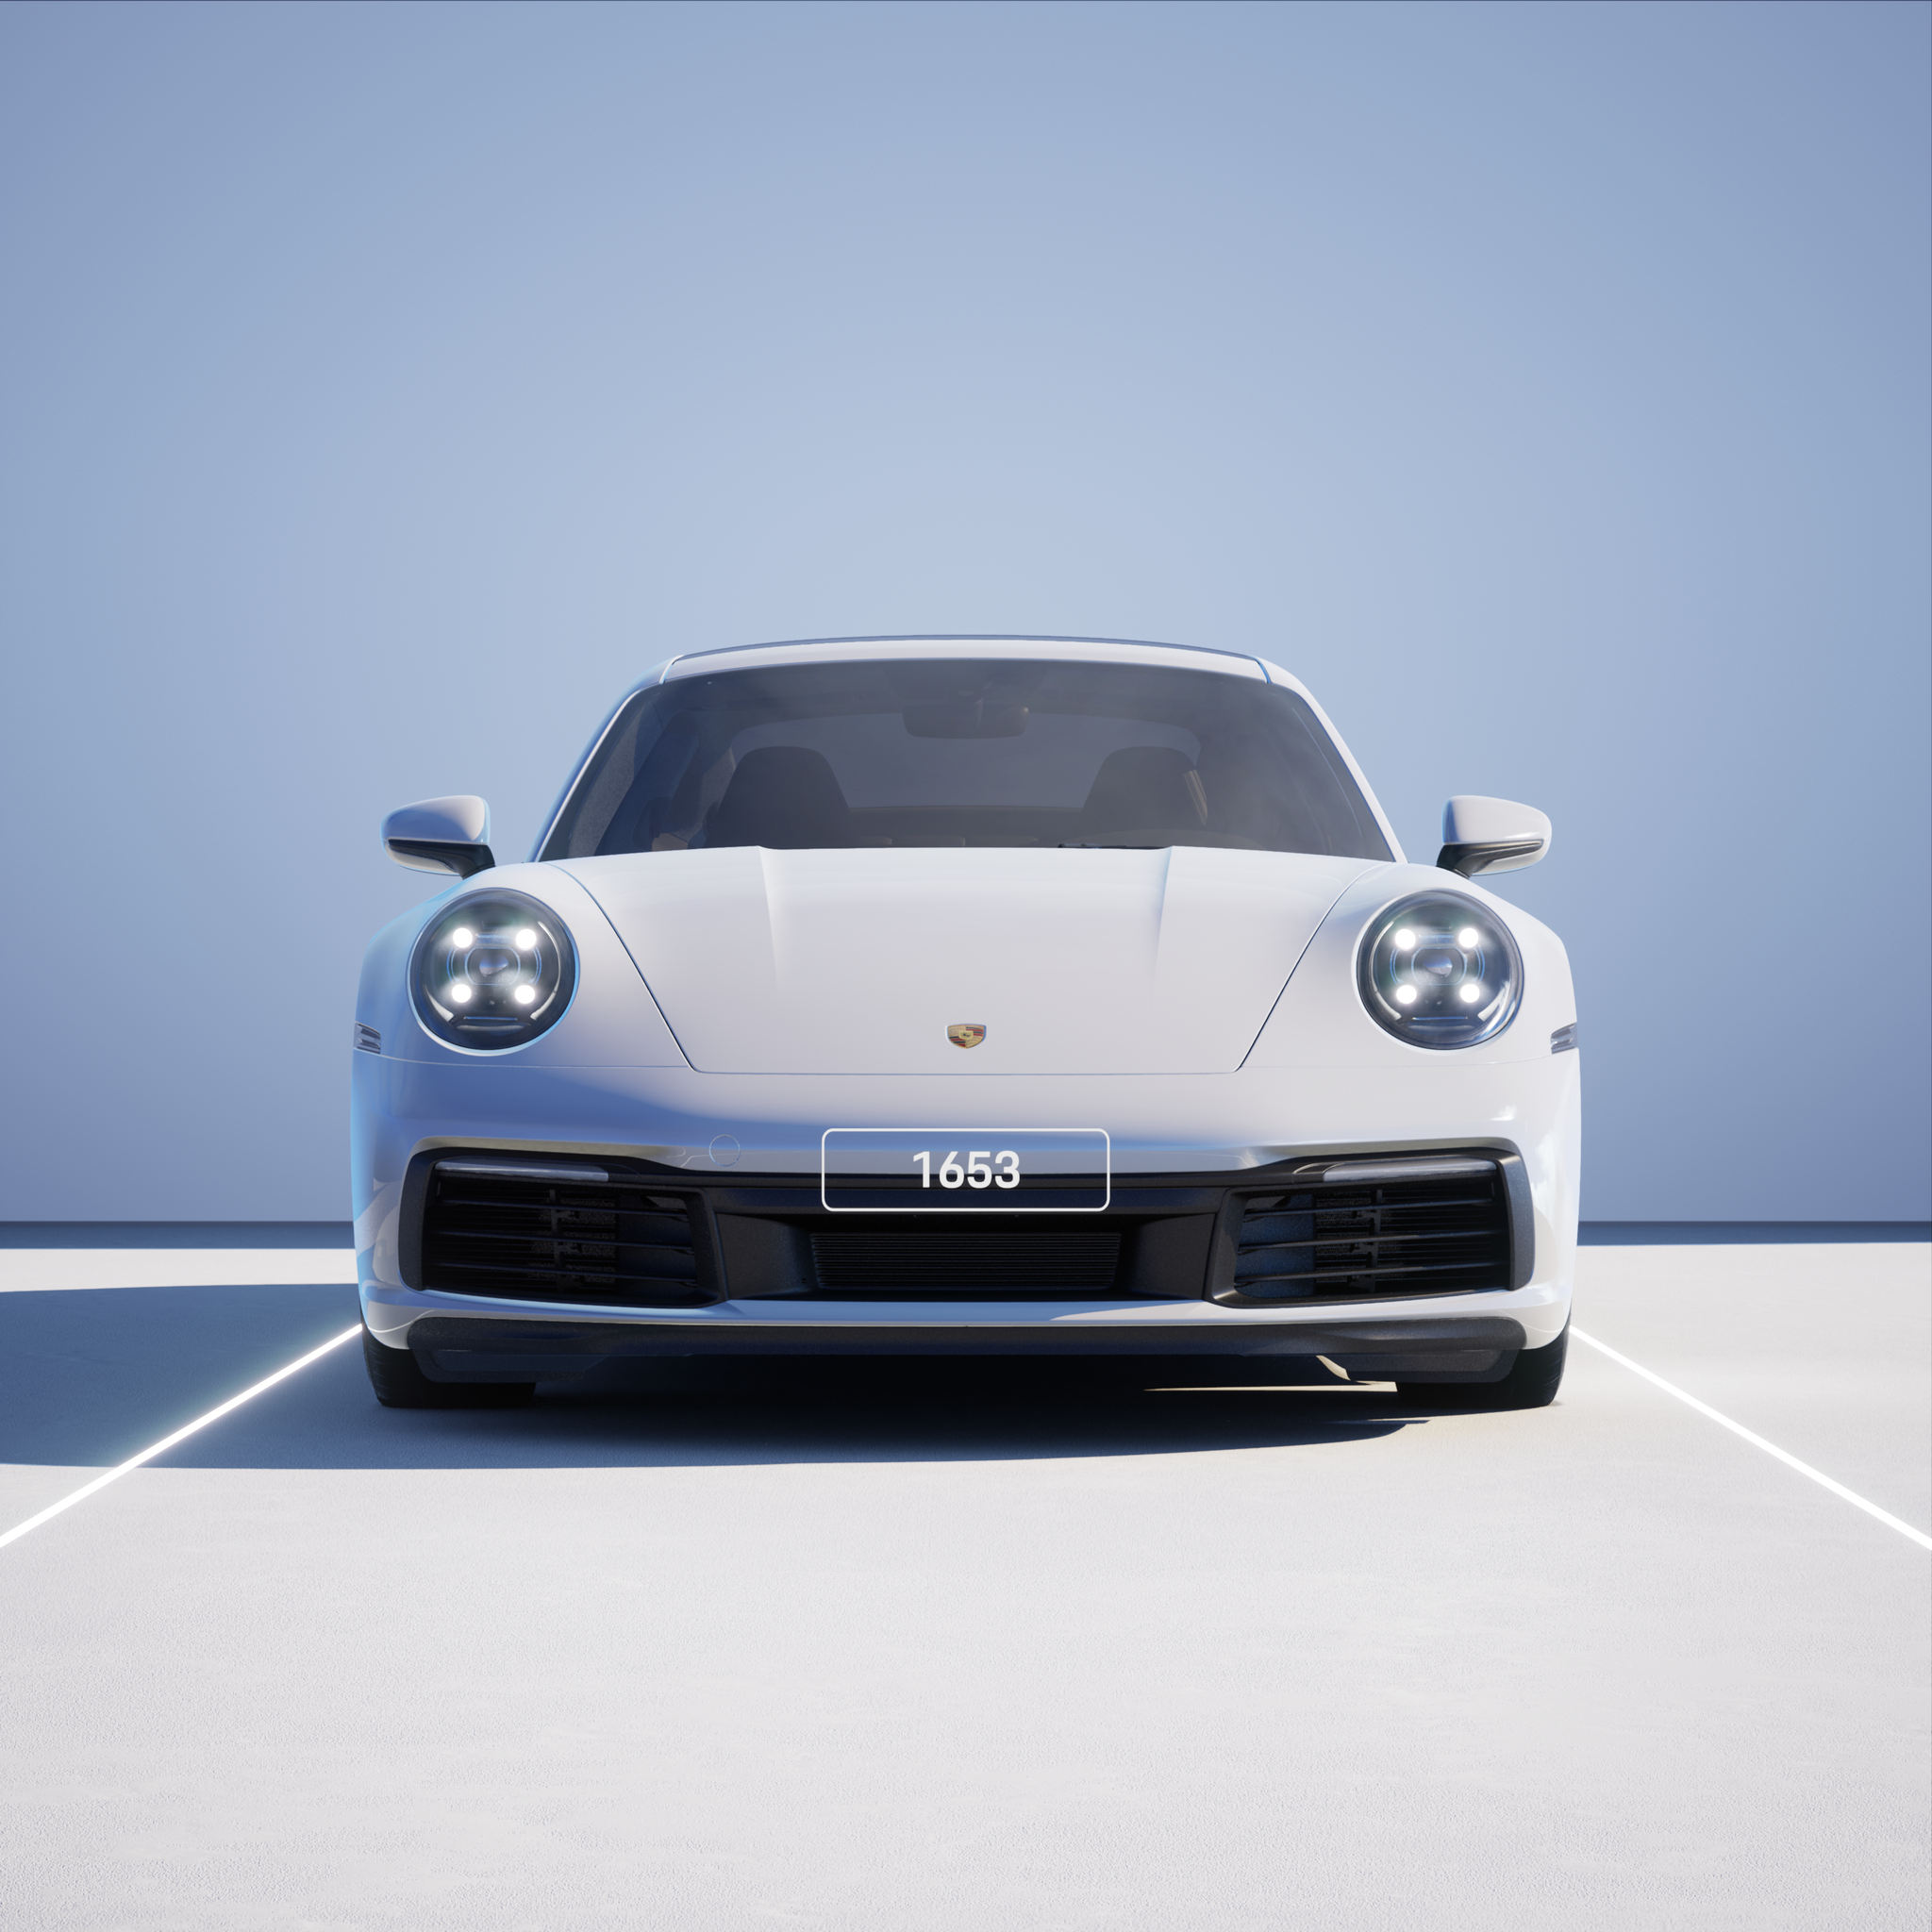 The PORSCHΞ 911 1653 image in phase